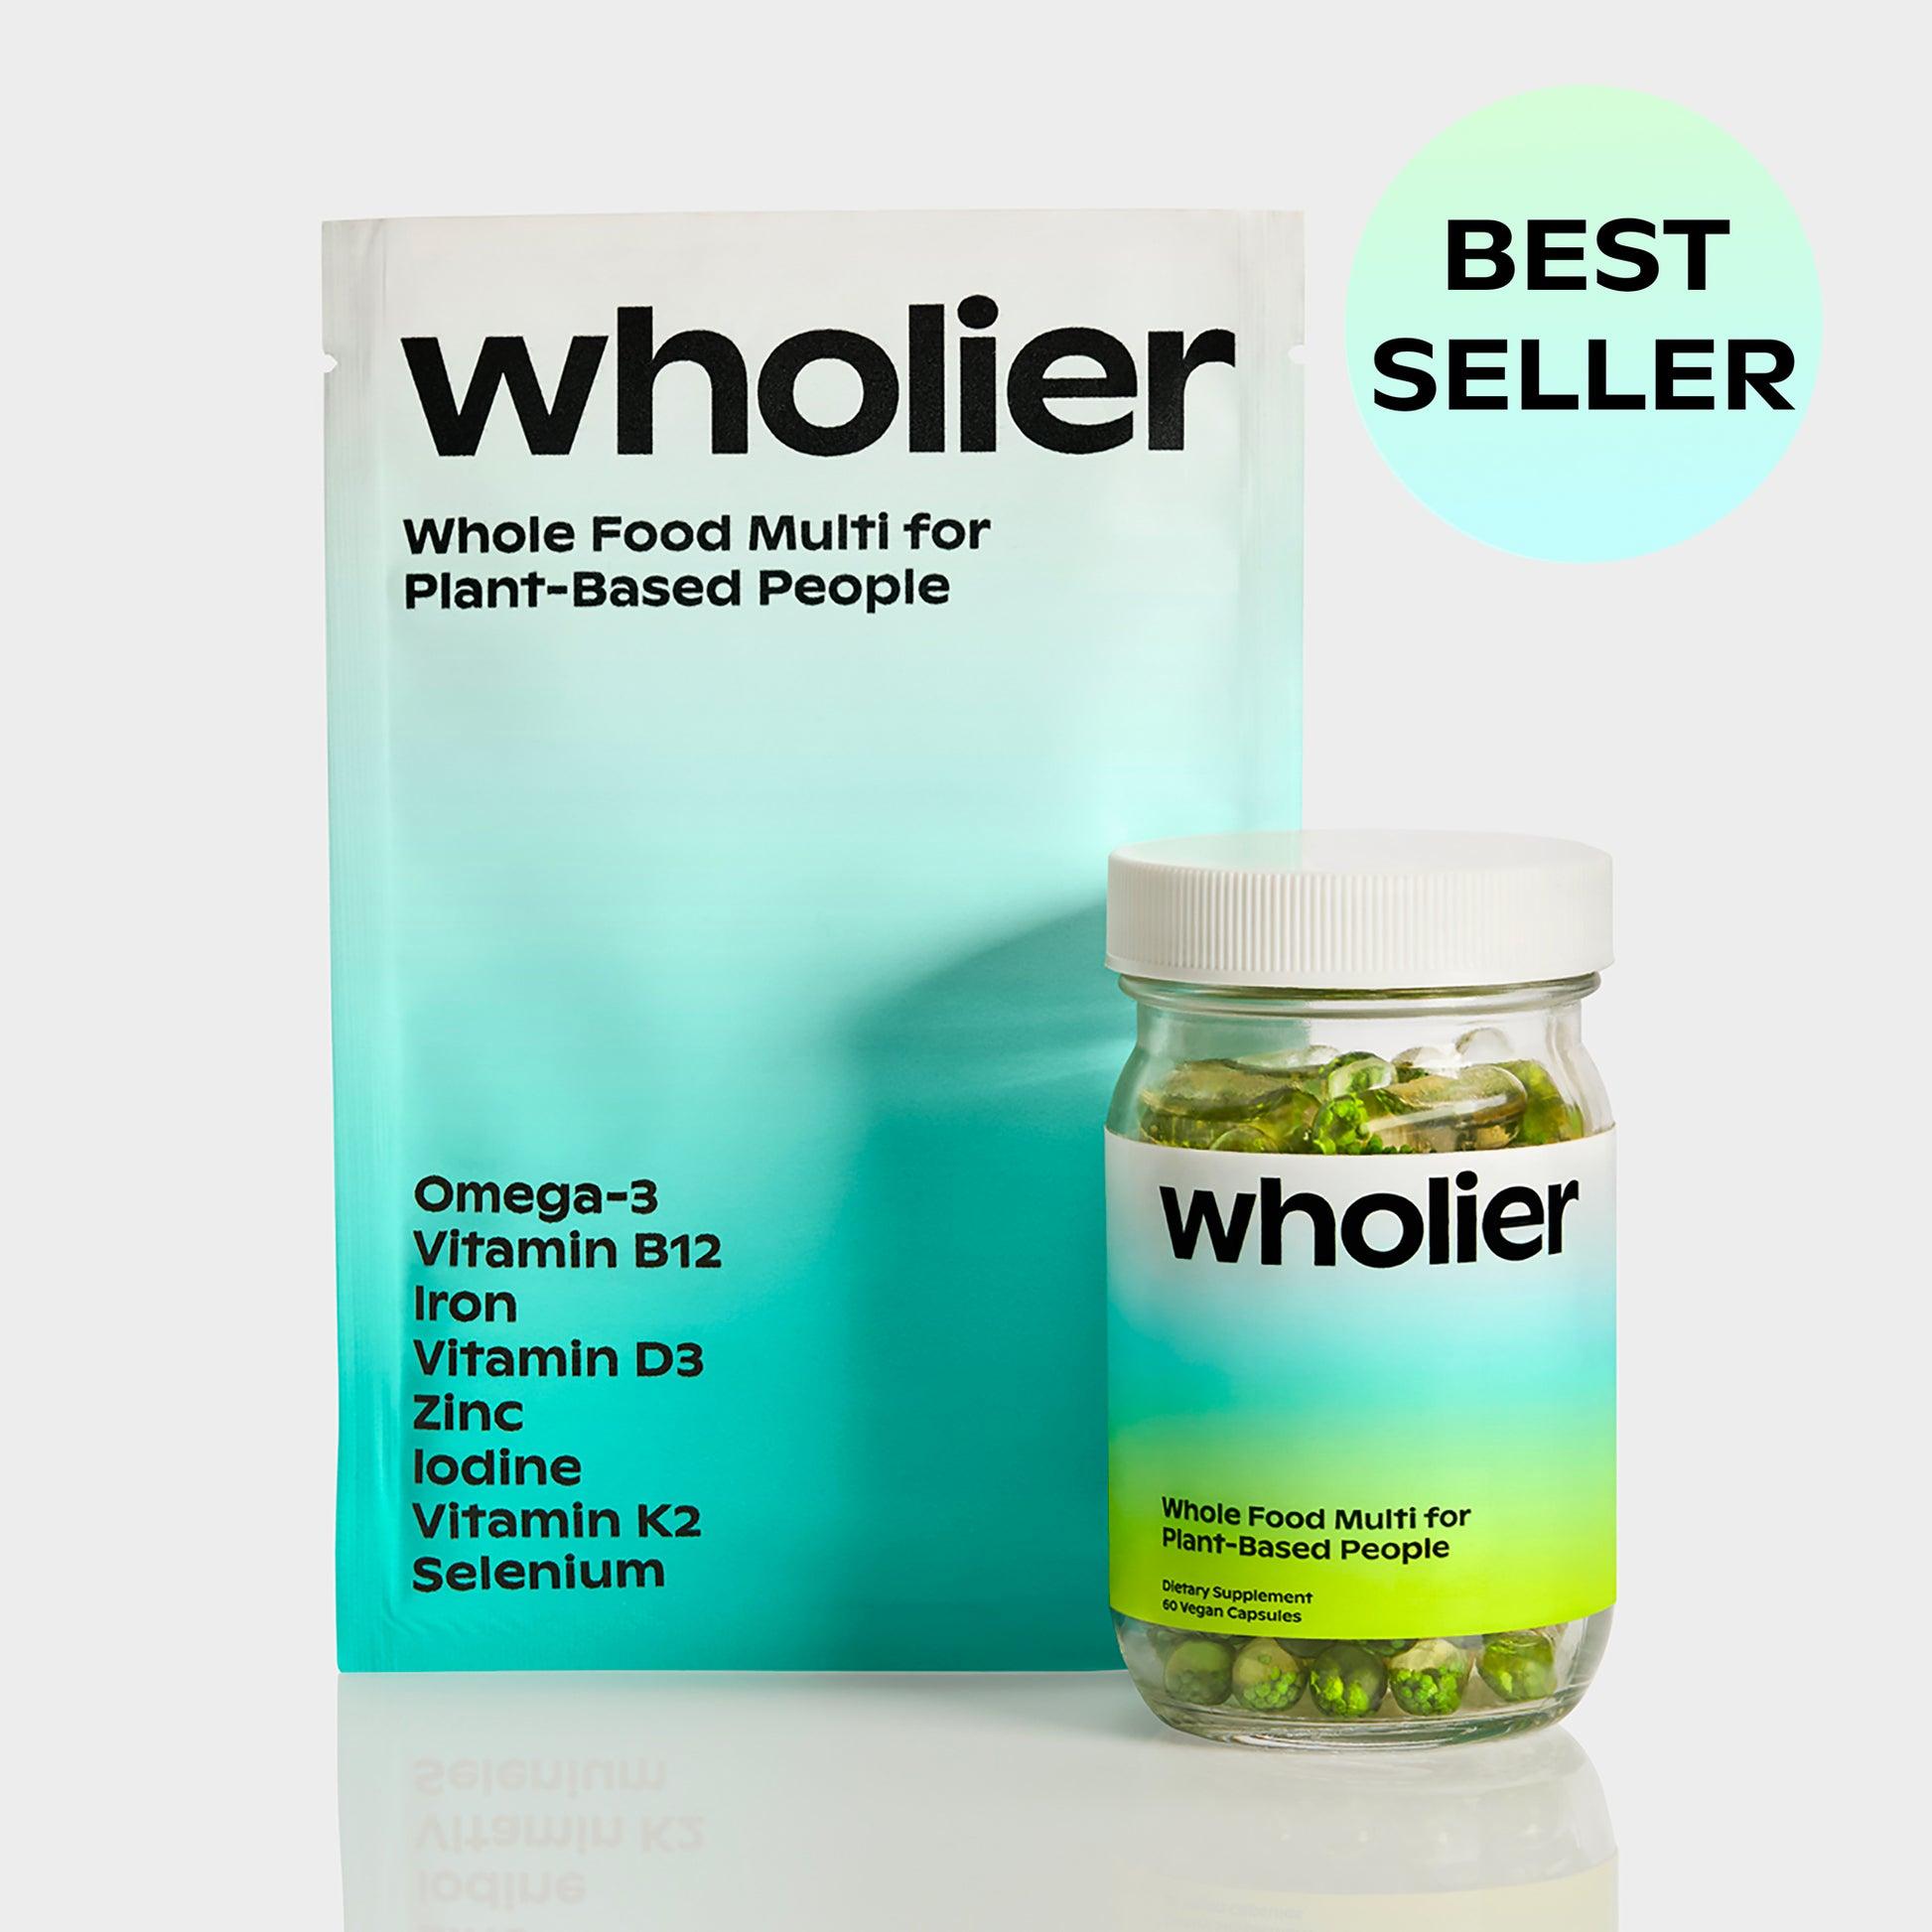 A white bottle of Wholier, a plant-based multivitamin, sits in front of a blue bag of the same product.